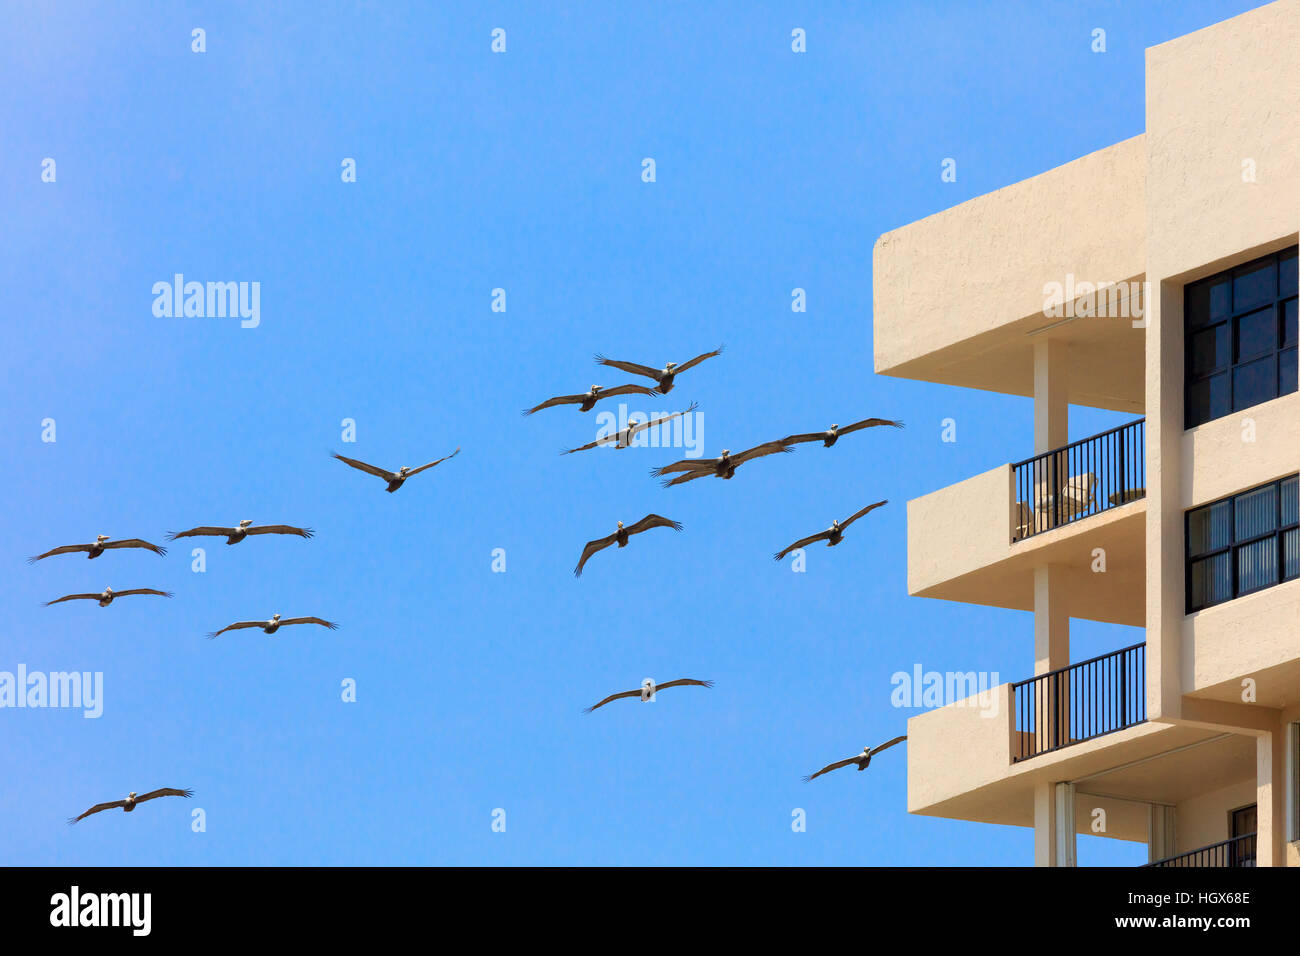 Swarm of pelicans flying around a house, Florida, USA Stock Photo